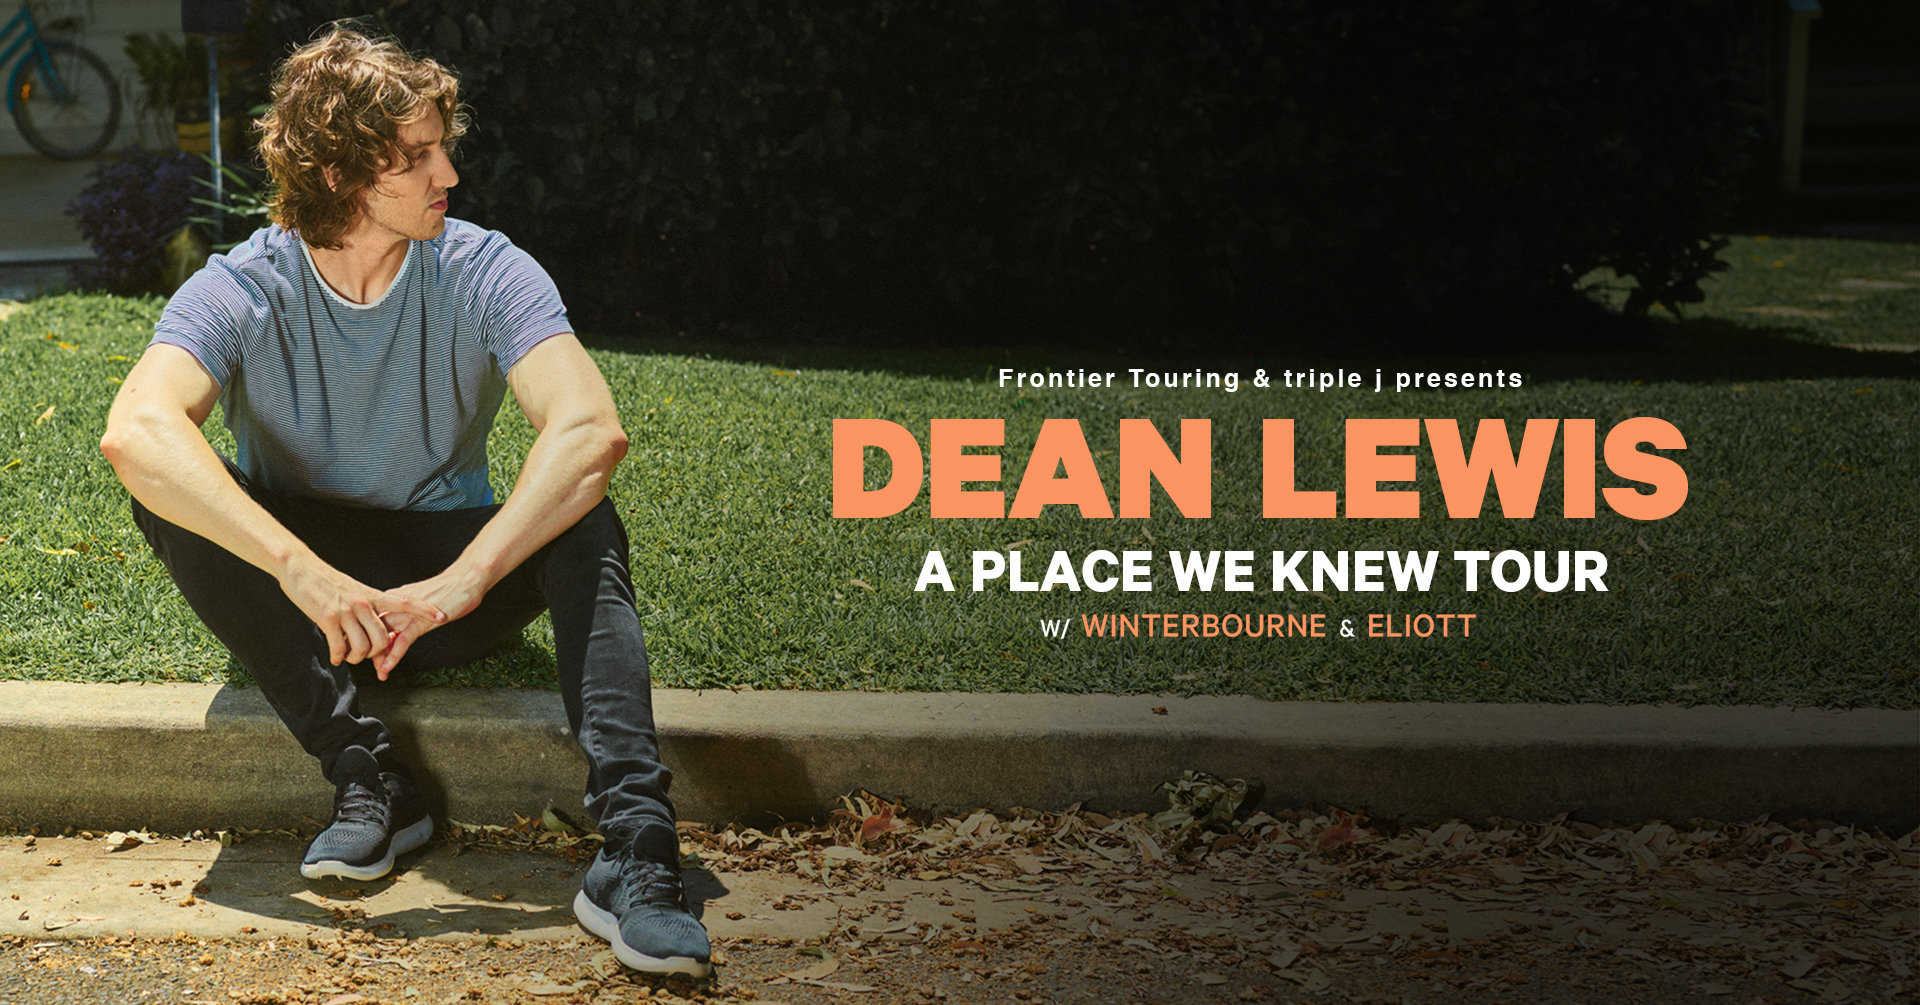 Dean Lewis has added a third concert in Melbourne